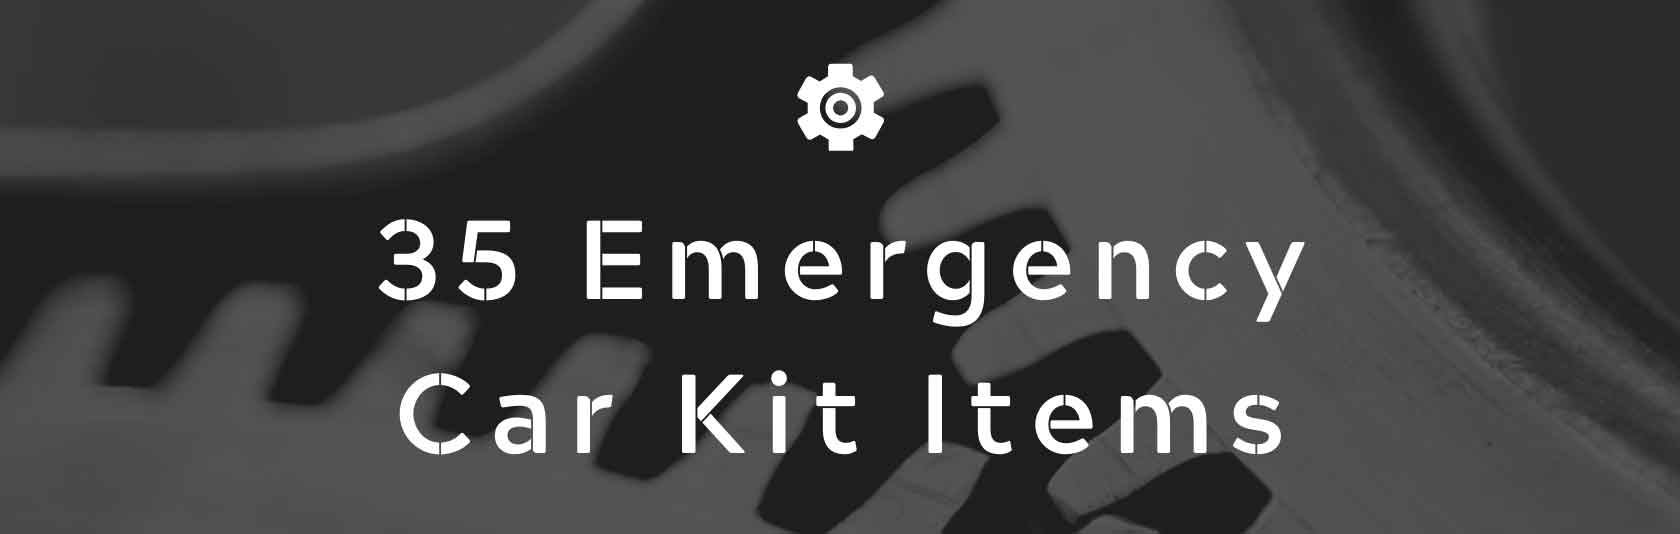 35 Emergency Car Kit Items You Must Have